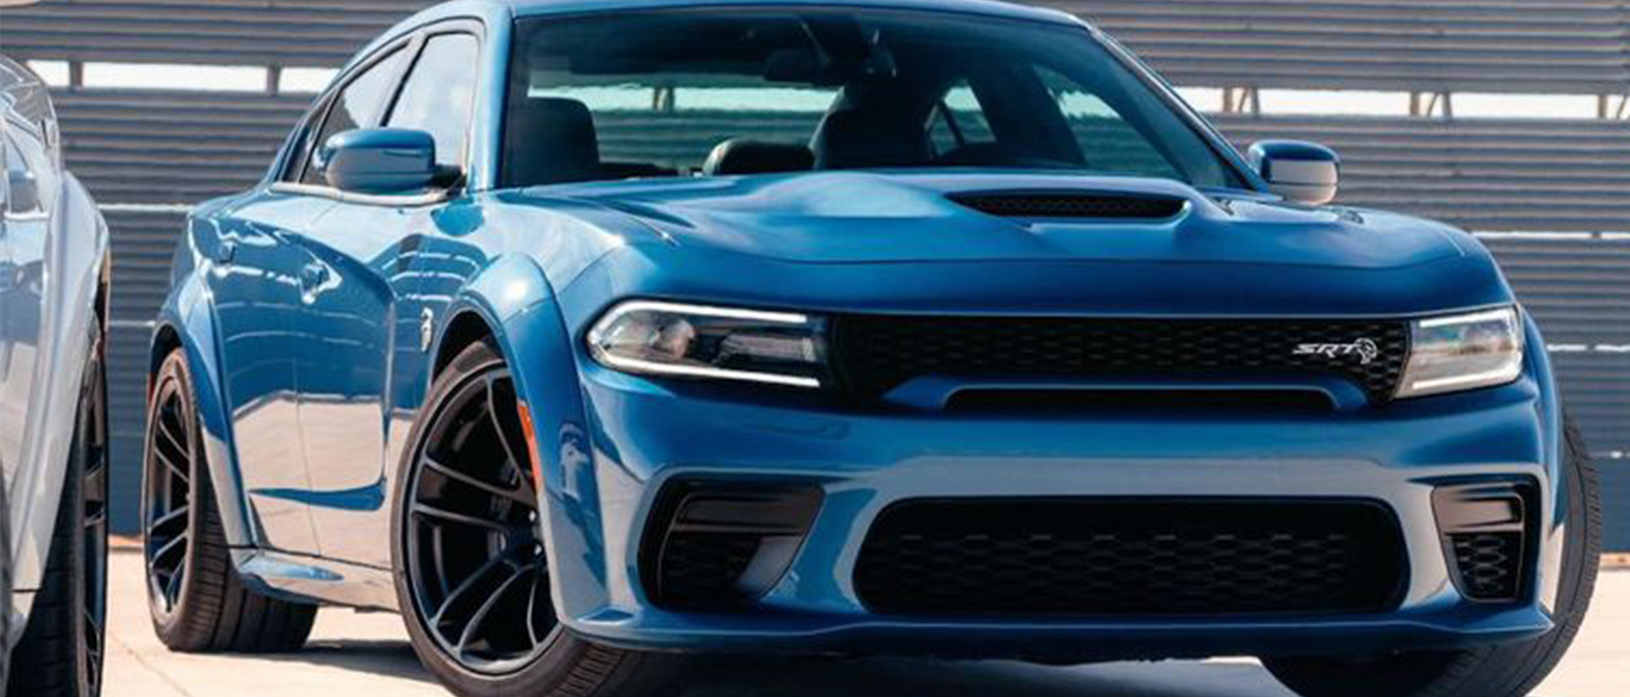 Dodge Charger SRT<sup>®</sup> Hellcat: Fast Facts